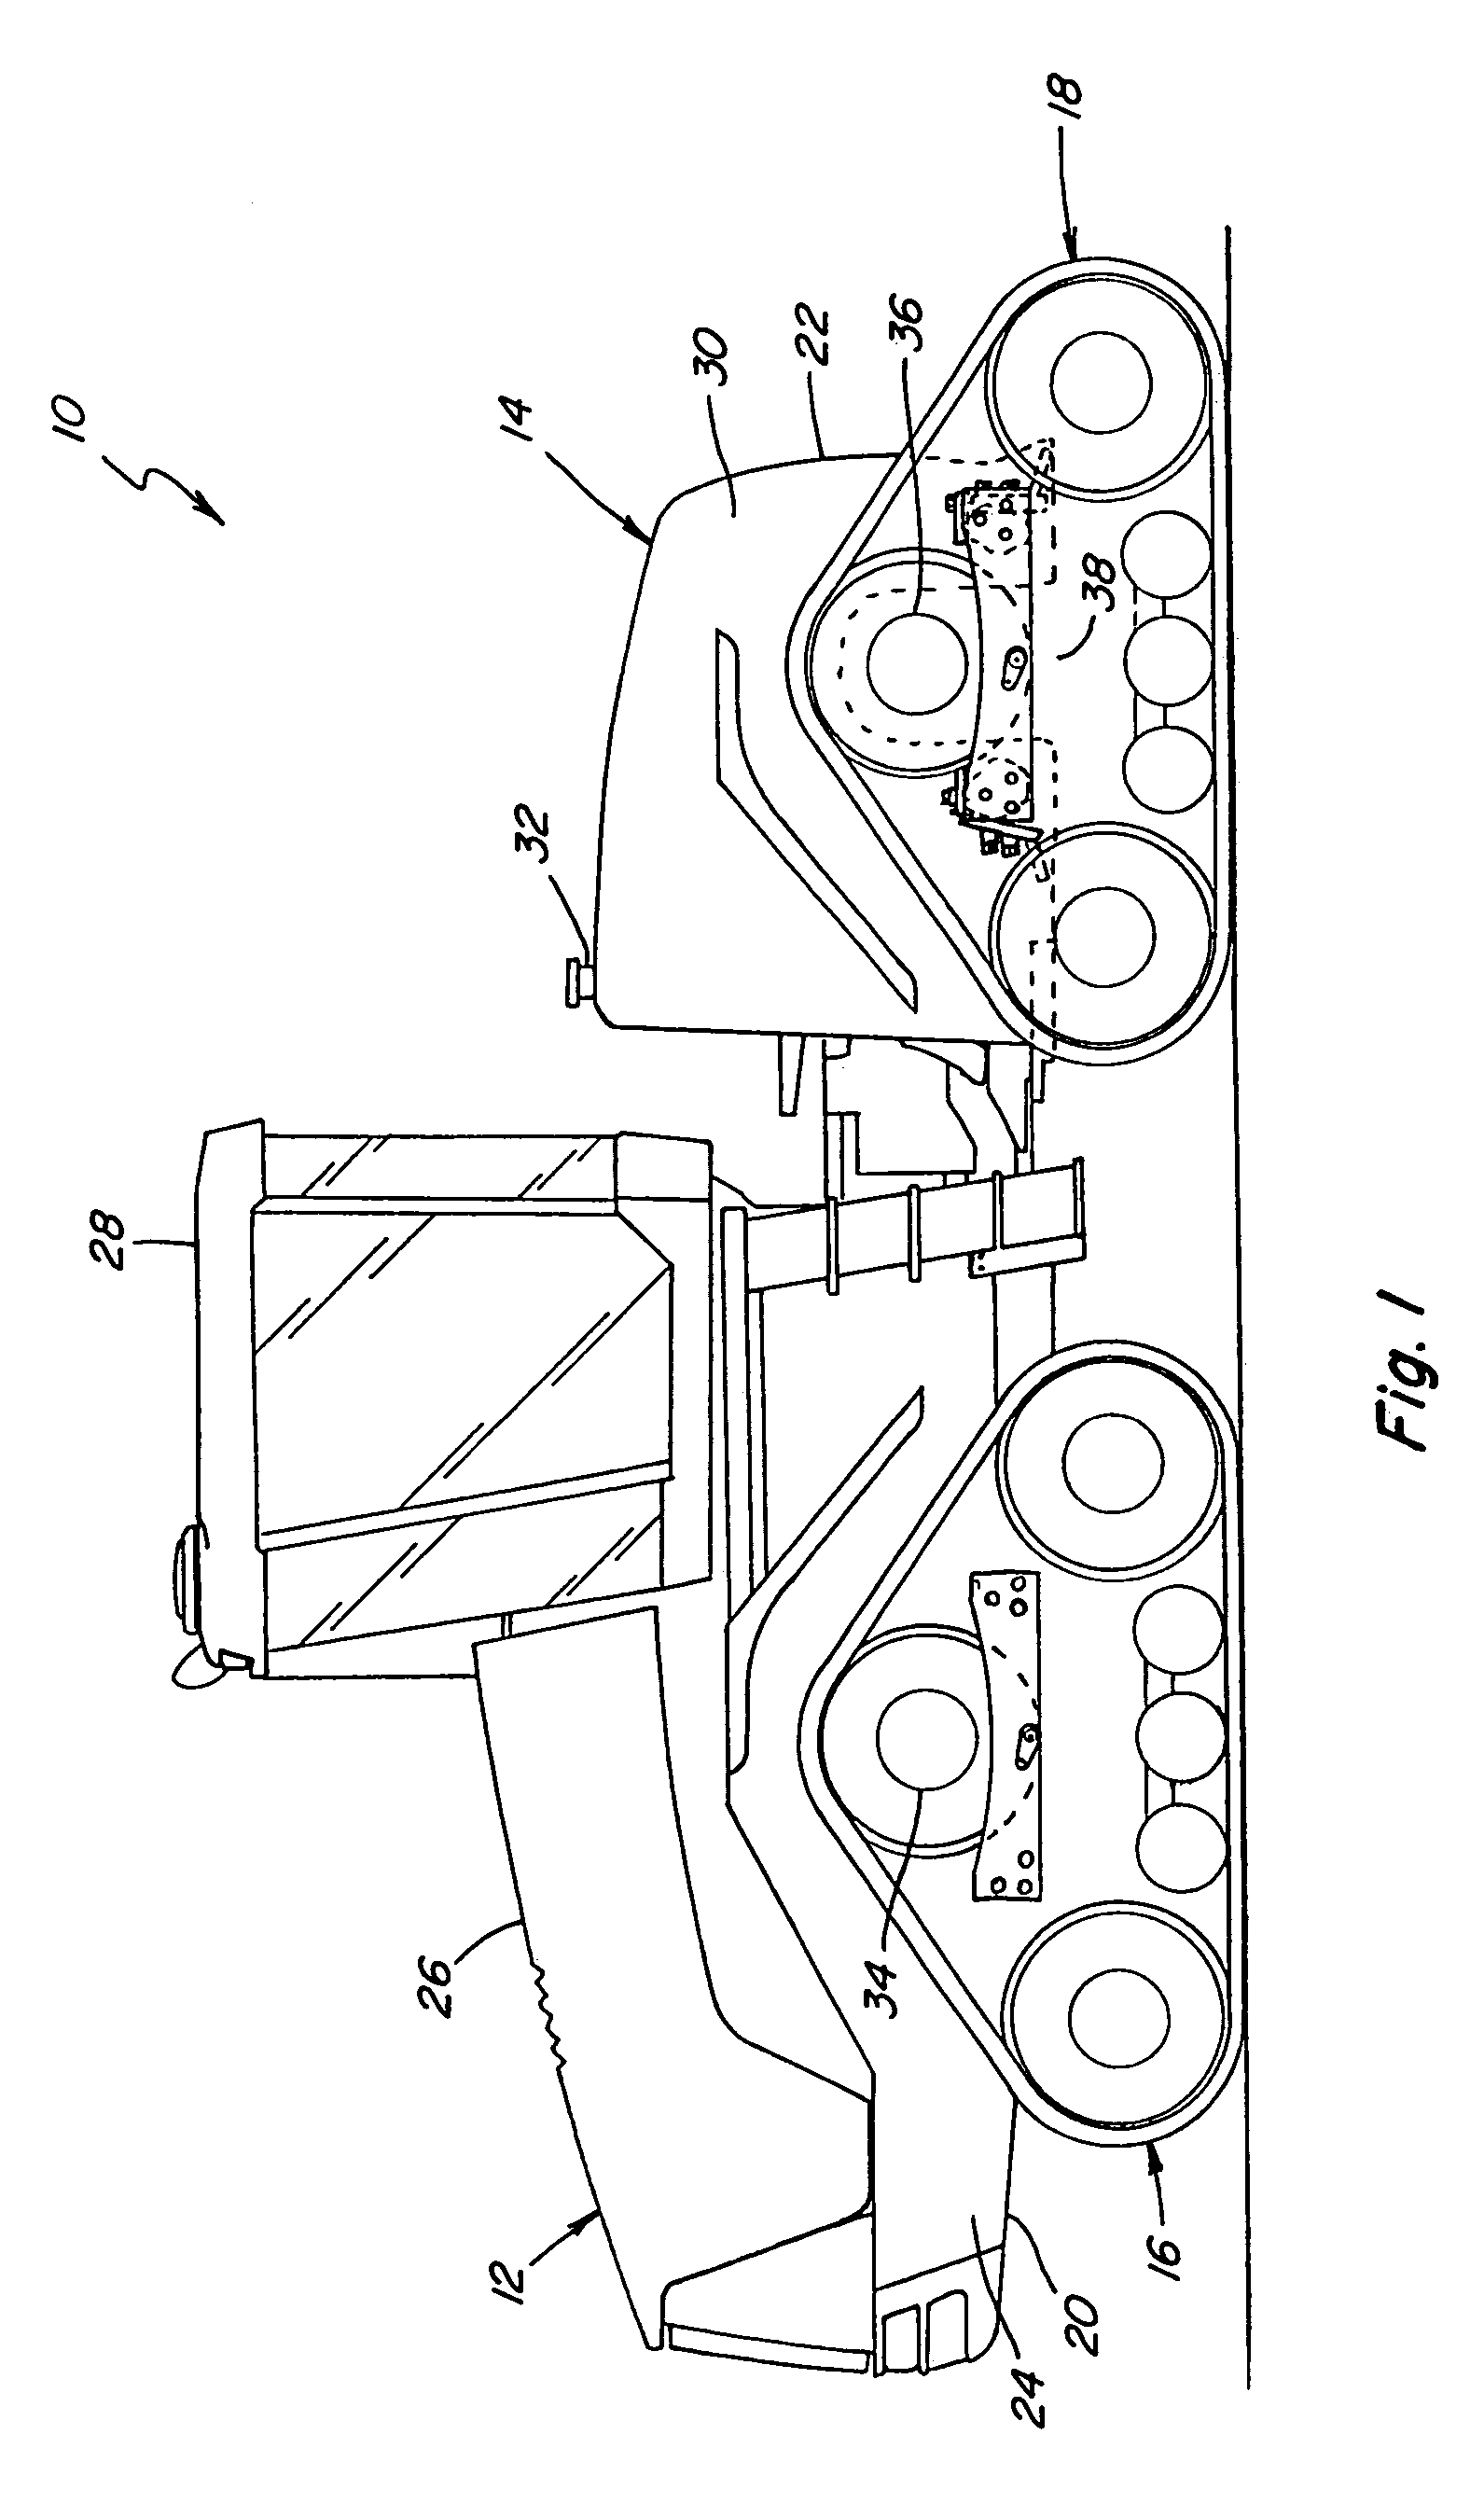 Apparatus and method for reducing shear loading on elements connecting an axle and a chassis of a vehicle